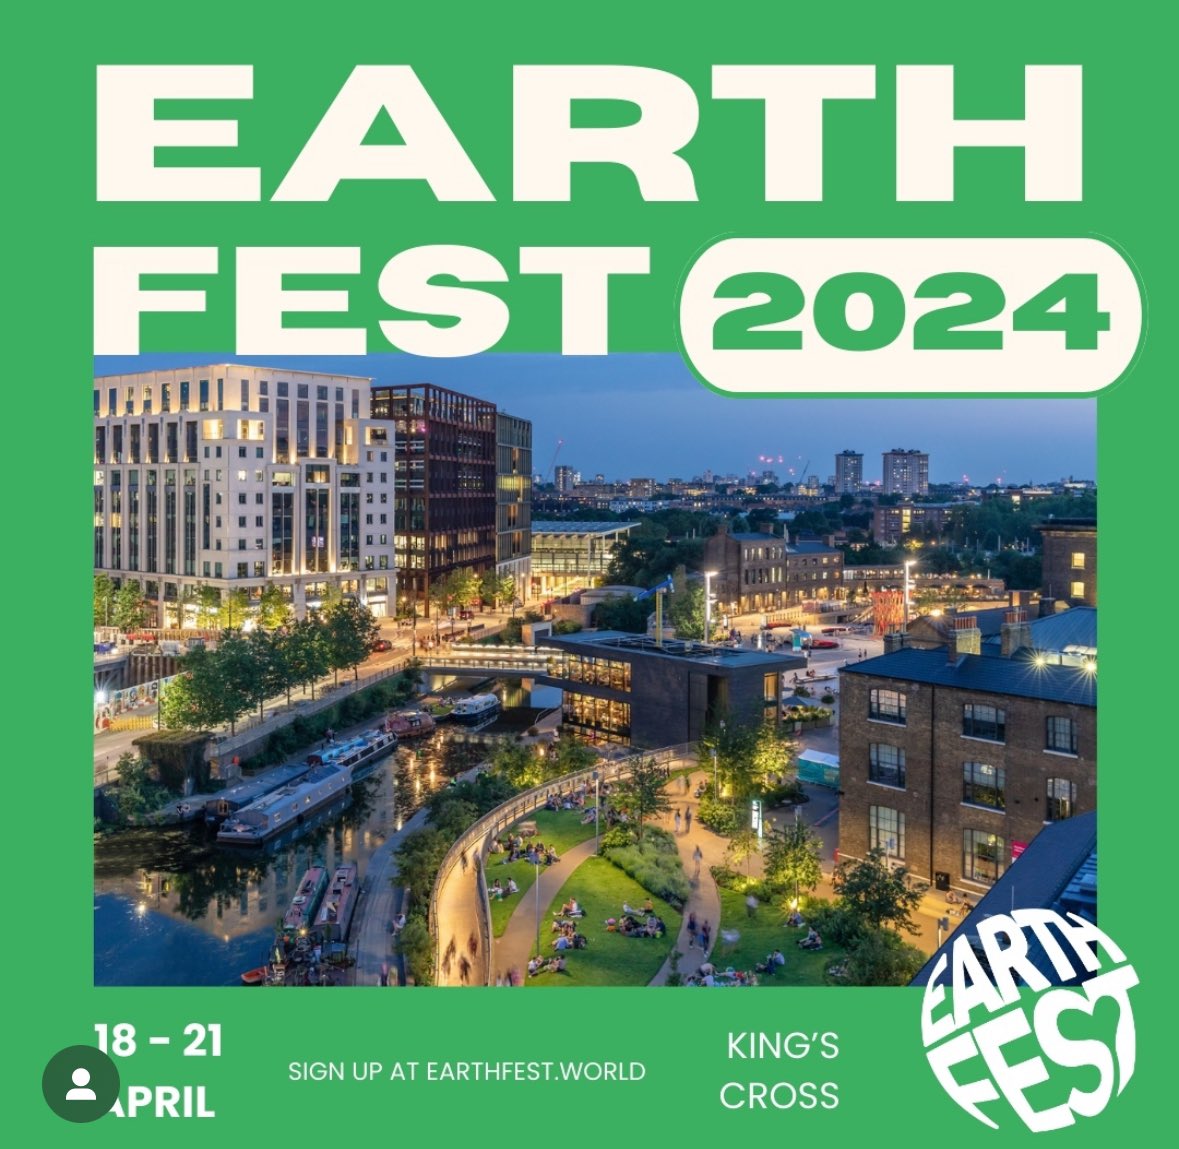 @EarthfestWorld - we will be there! Join us at the free sustainability festival! Earthfest will bring an incredible line-up of speakers, an immersive exhibition and a programme of interactive workshops - all centred around climate-related topics! @CamdenCleanAir